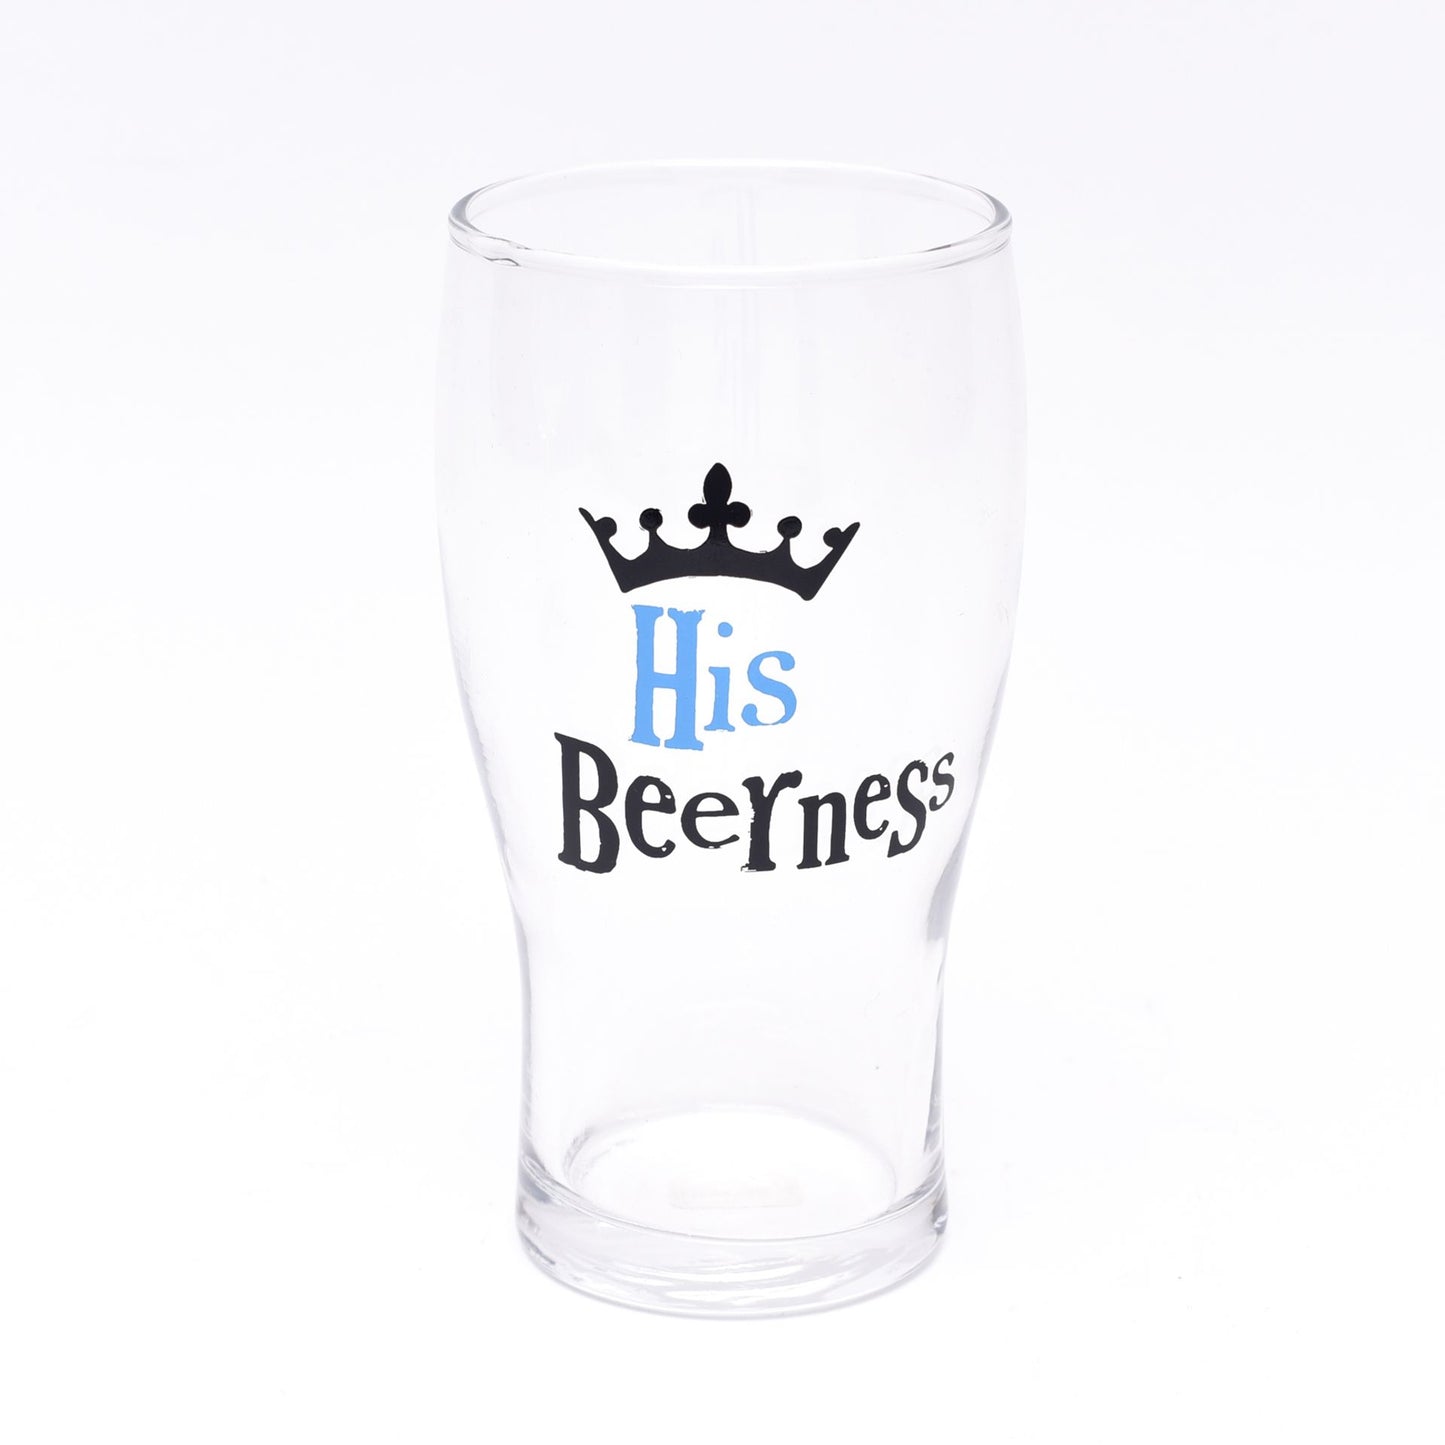 His and Hers Glasses | Set of Two | "Her Wineness" & "His Beerness"